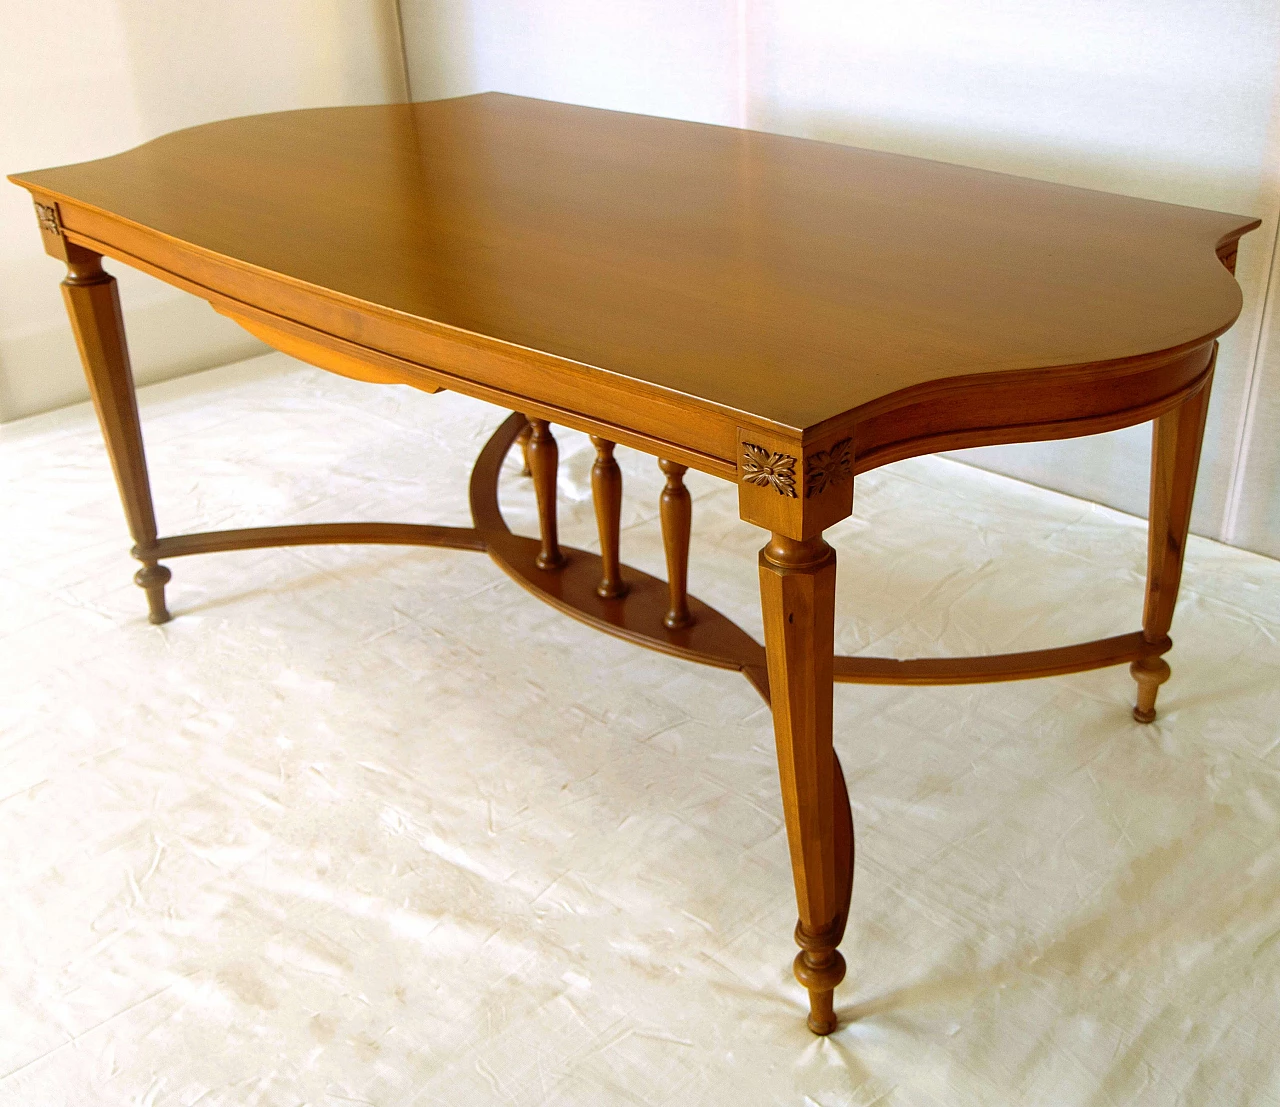 English-style walnut table with carvings and turned legs, 1940s 1